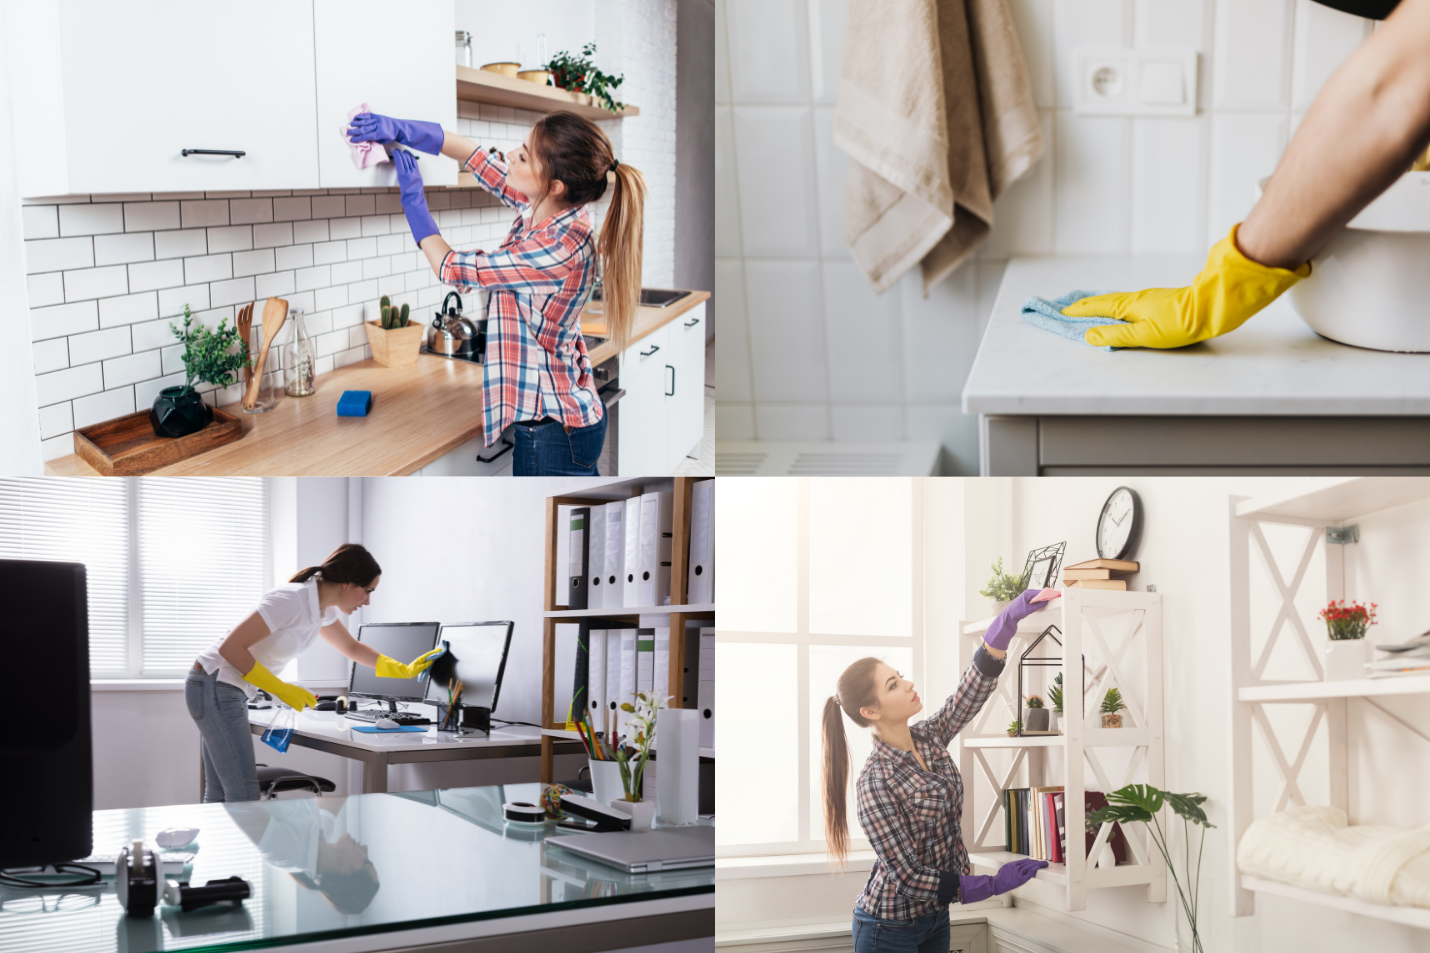 House Cleaning: One Disinfectant to Protect Every Corner